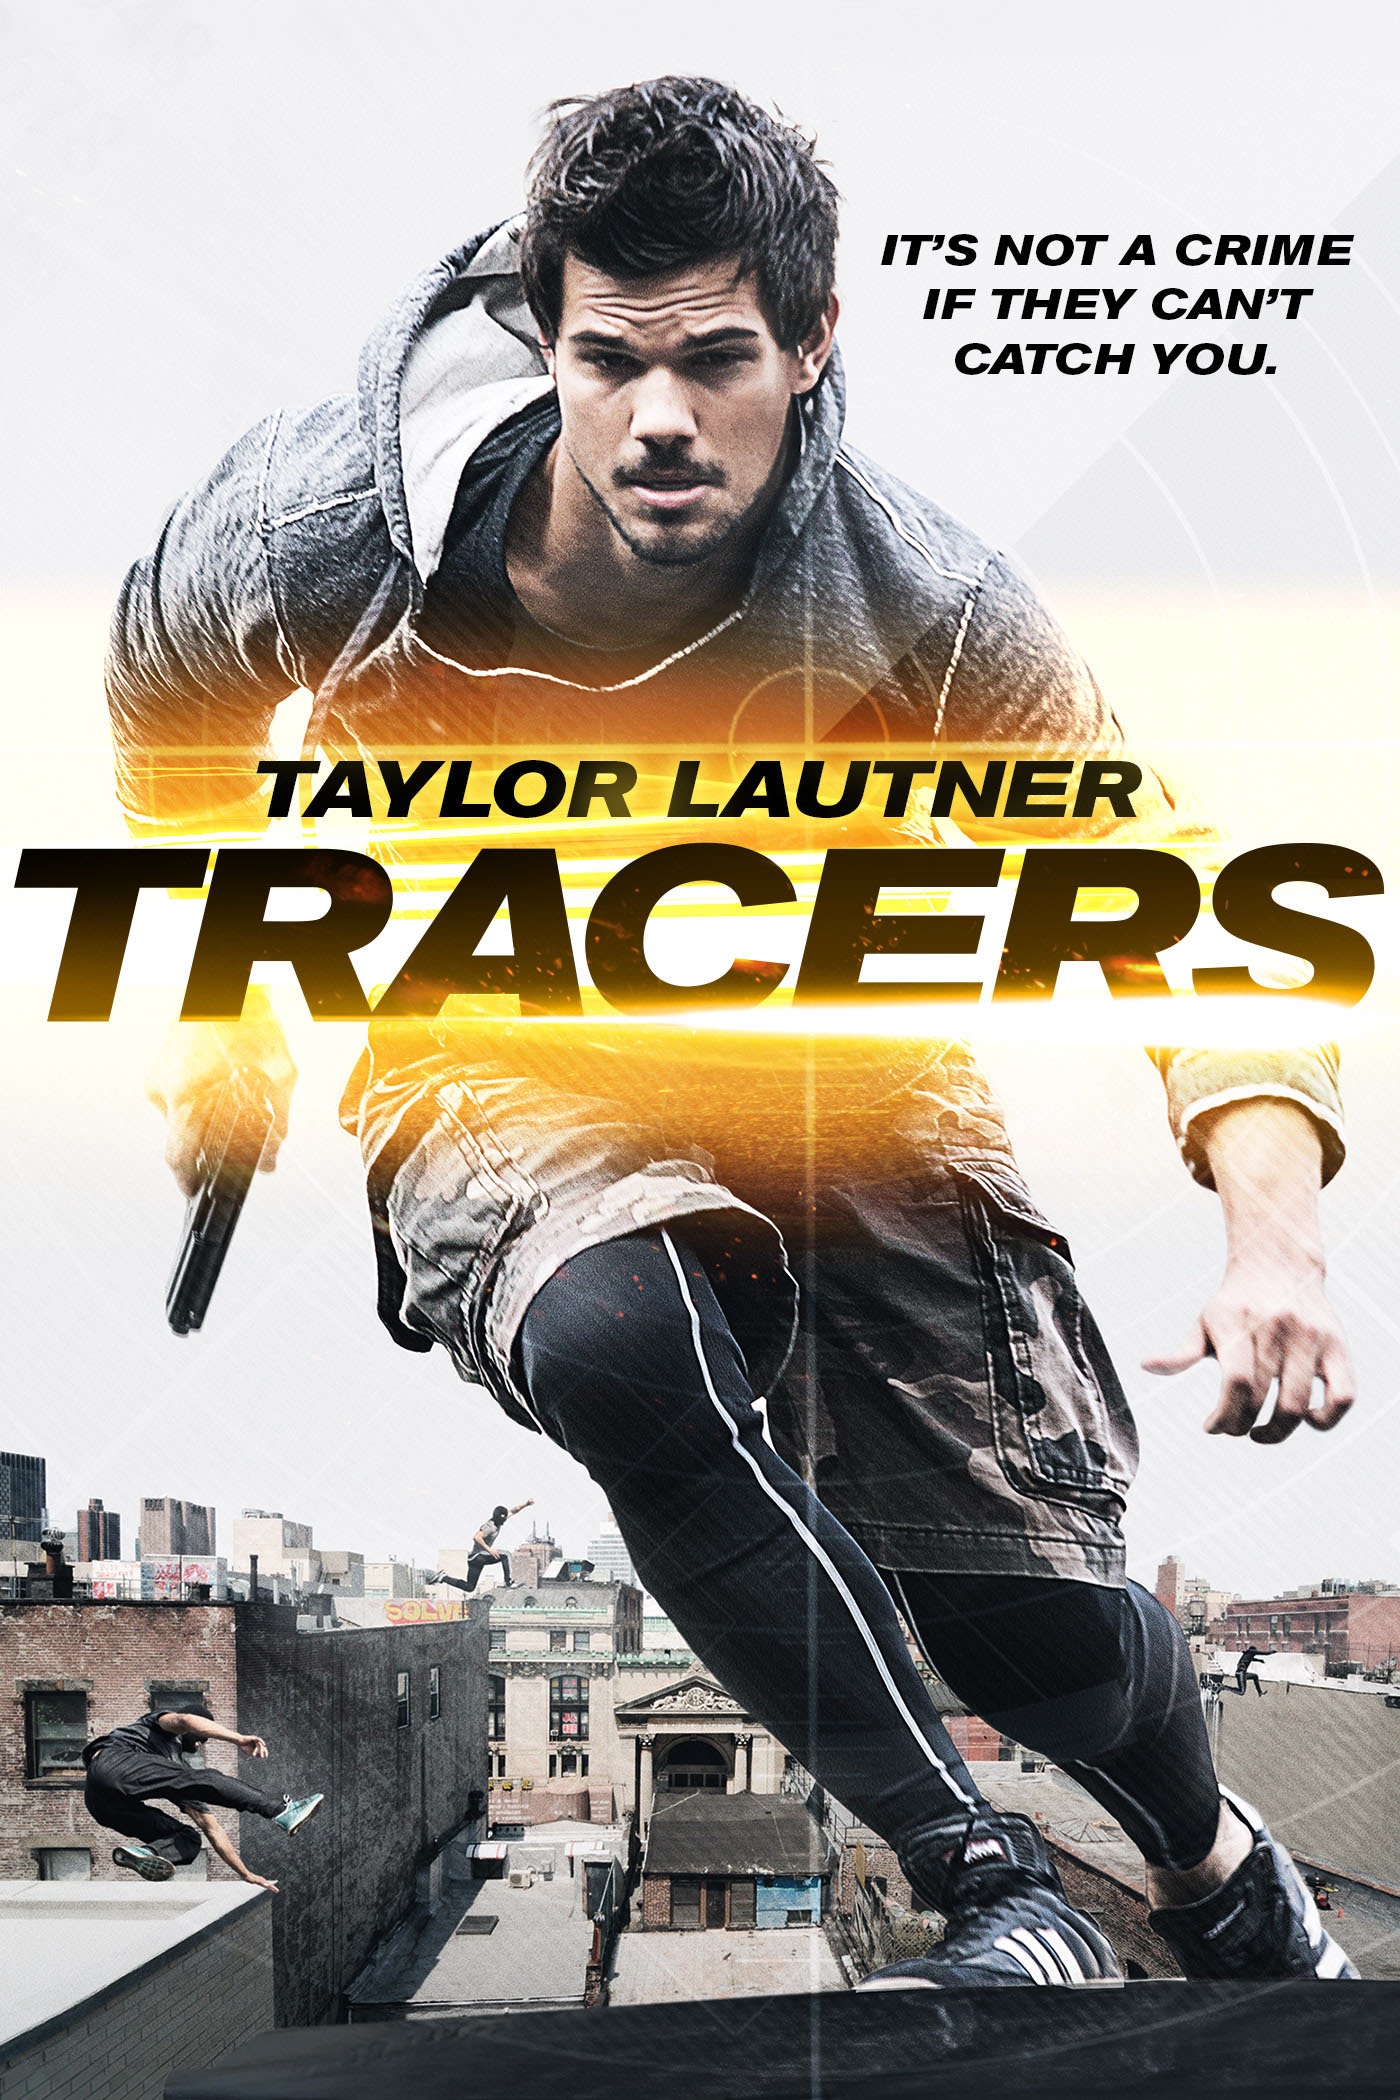 Tracers - watch full movie free with ads